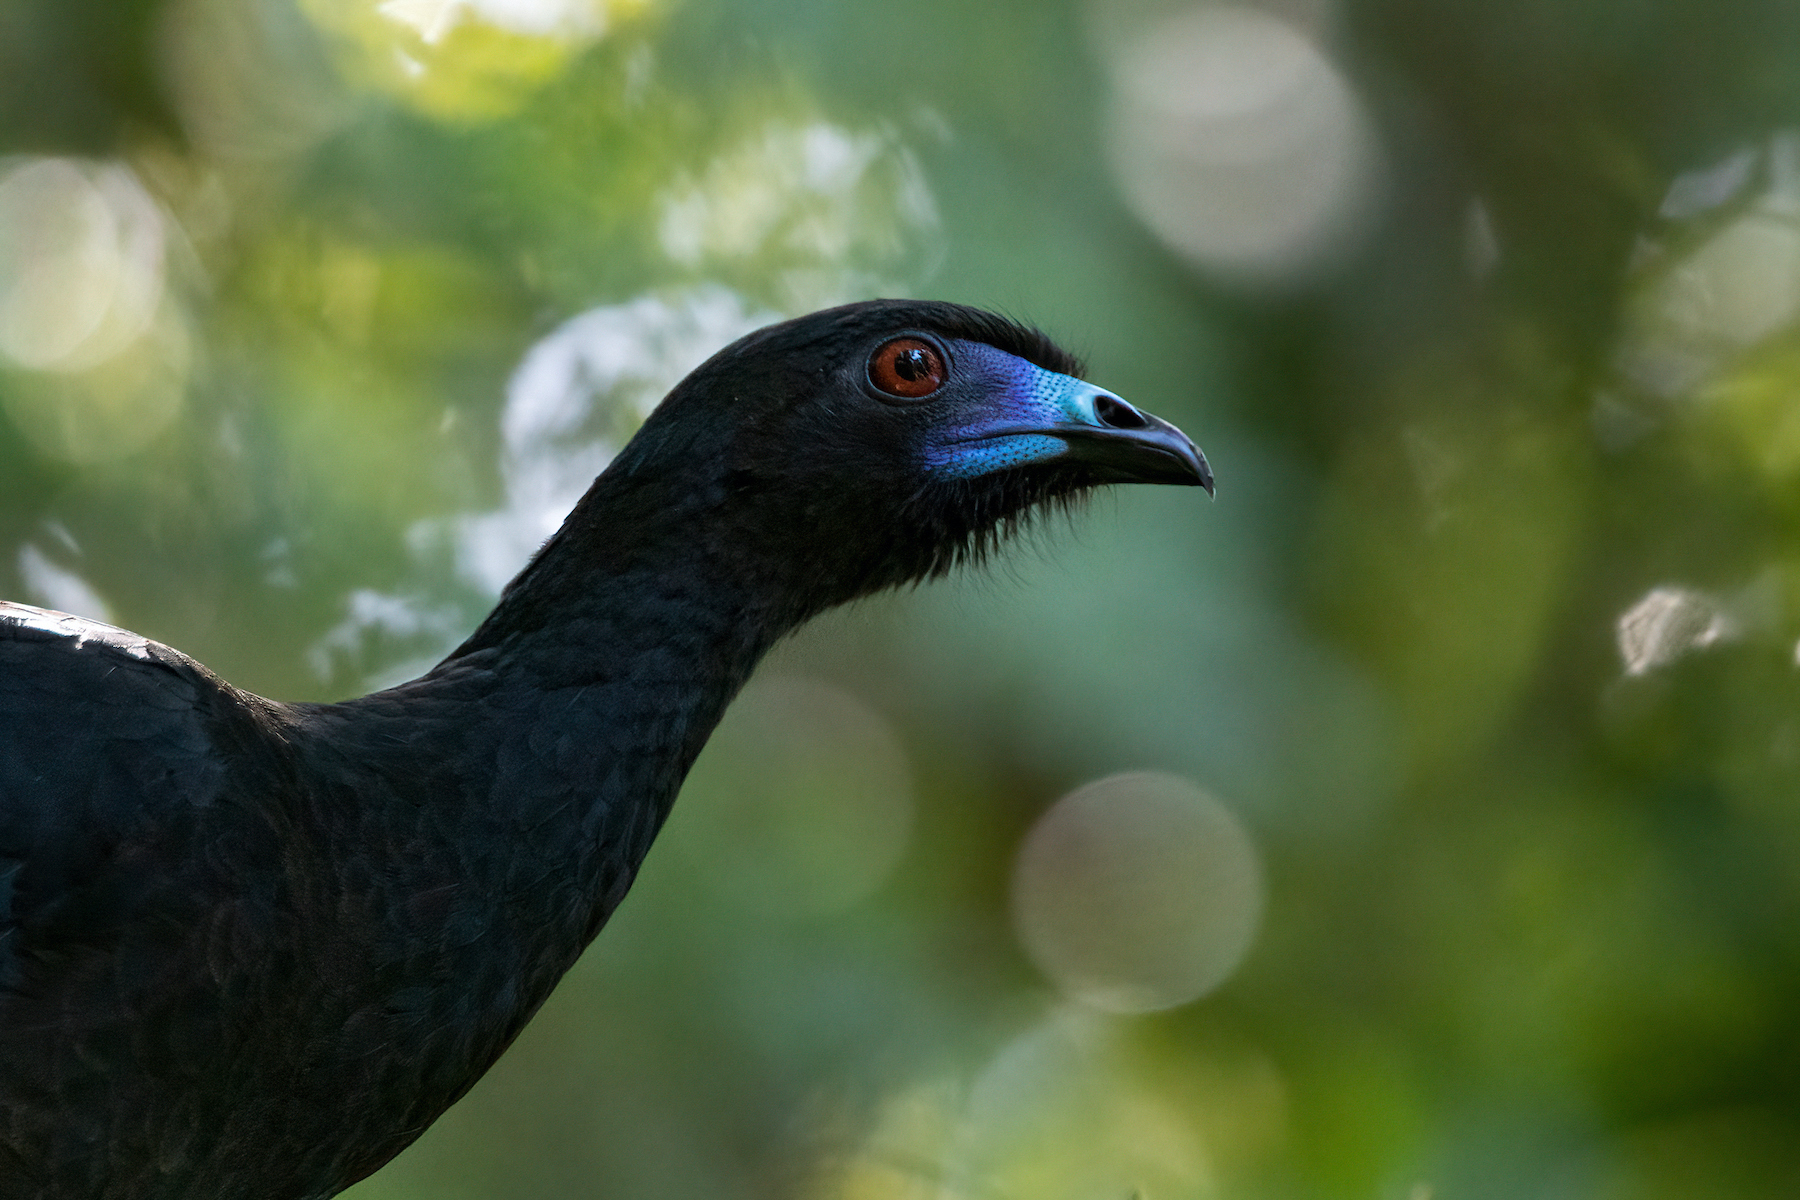 Shy Black Guans in the rainforests of Costa Rica